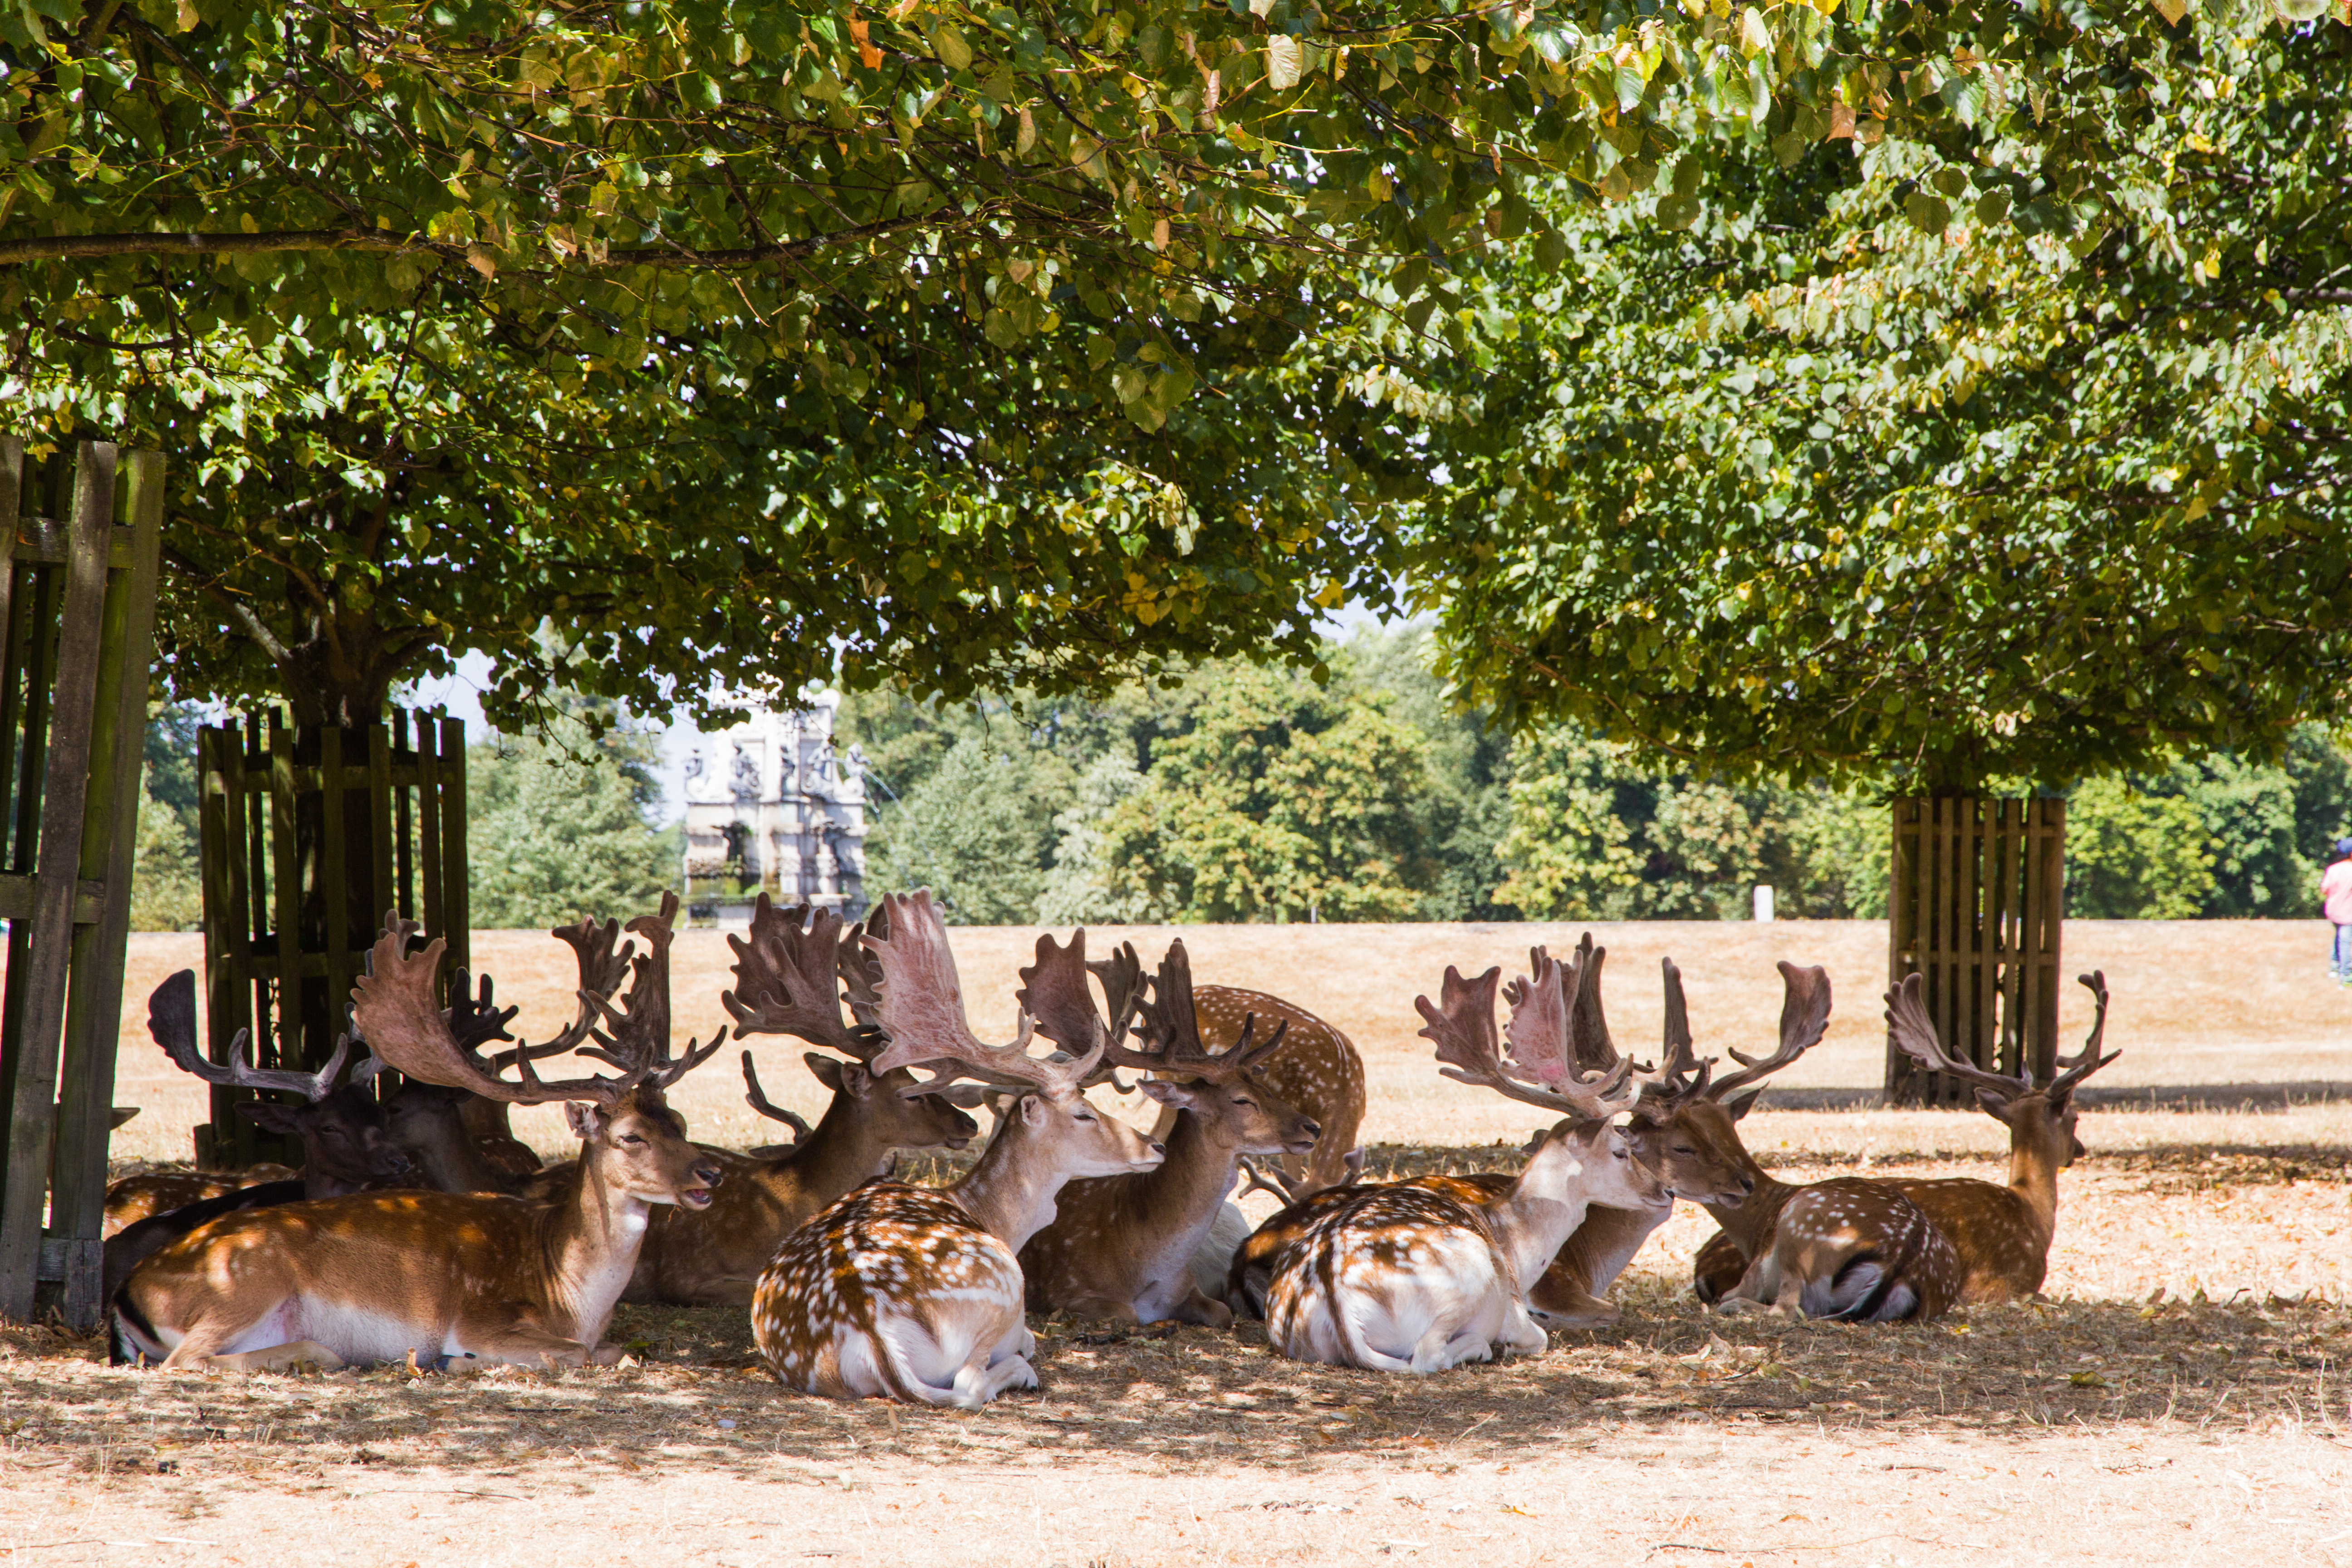 During the 2018 summer heatwave fallow deer sit in shade under trees surrounded by brown grass in one of south west London’s parks